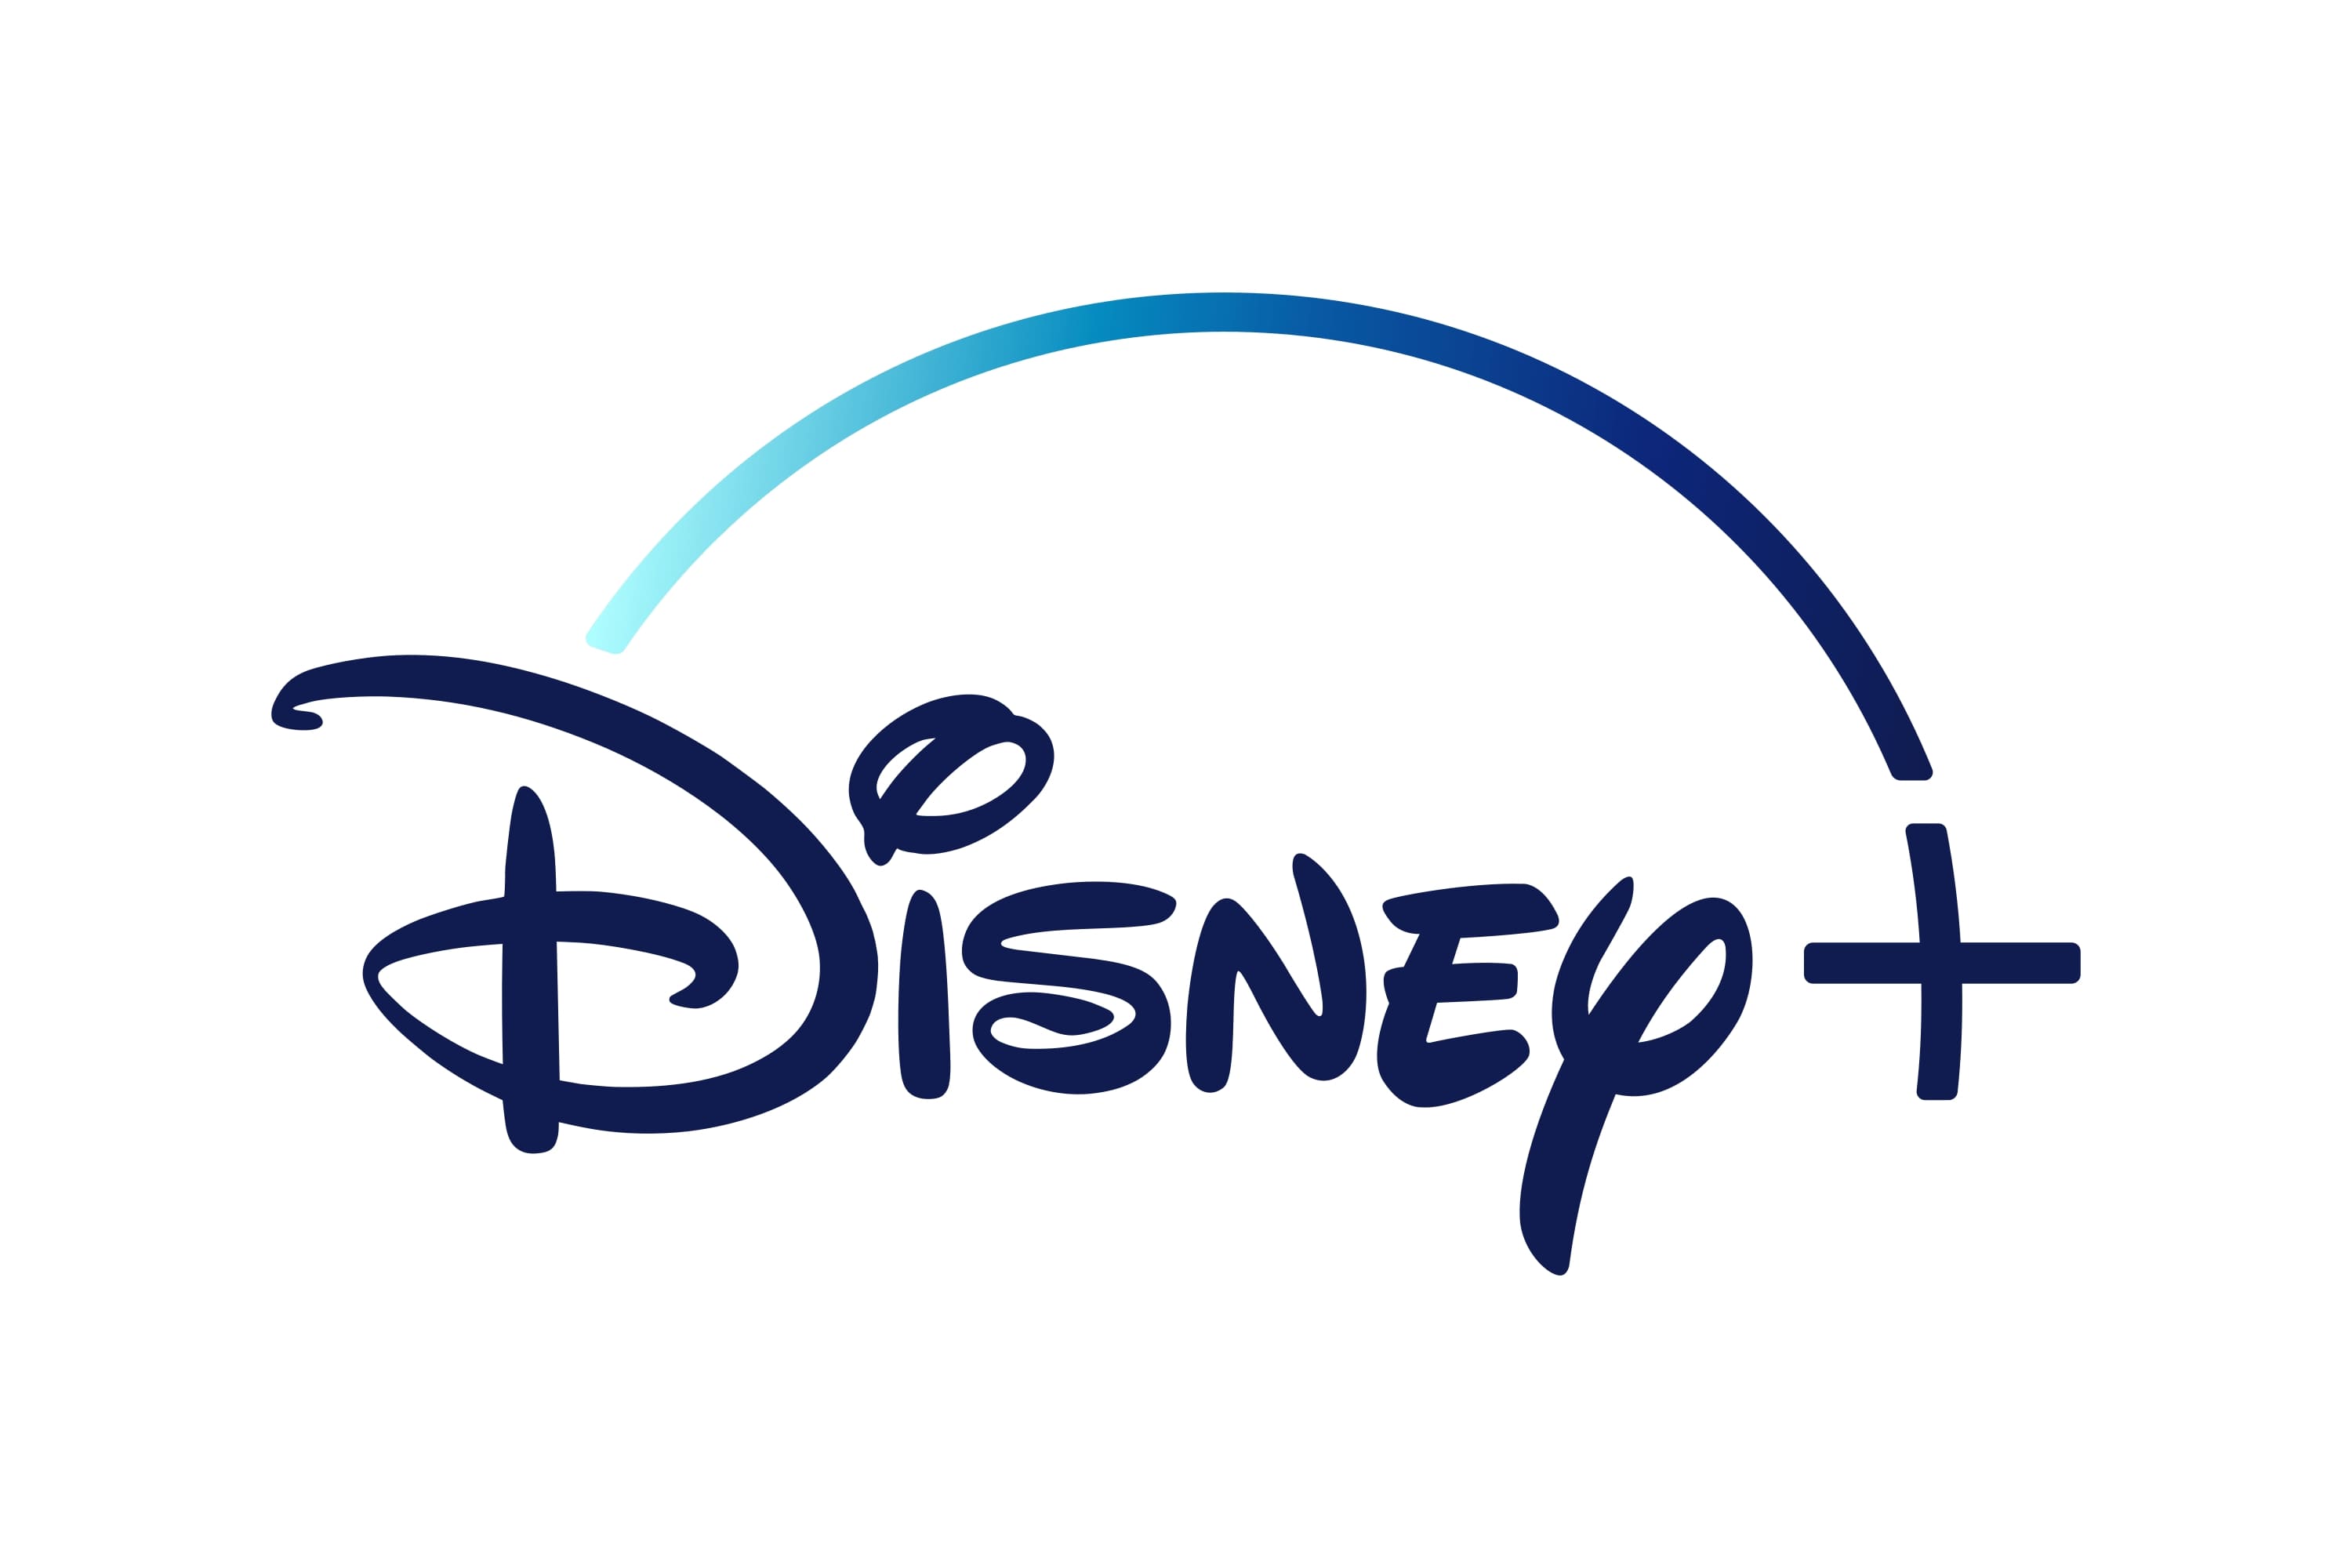 Top Disney+ Titles to Start January 2023 the Right Way